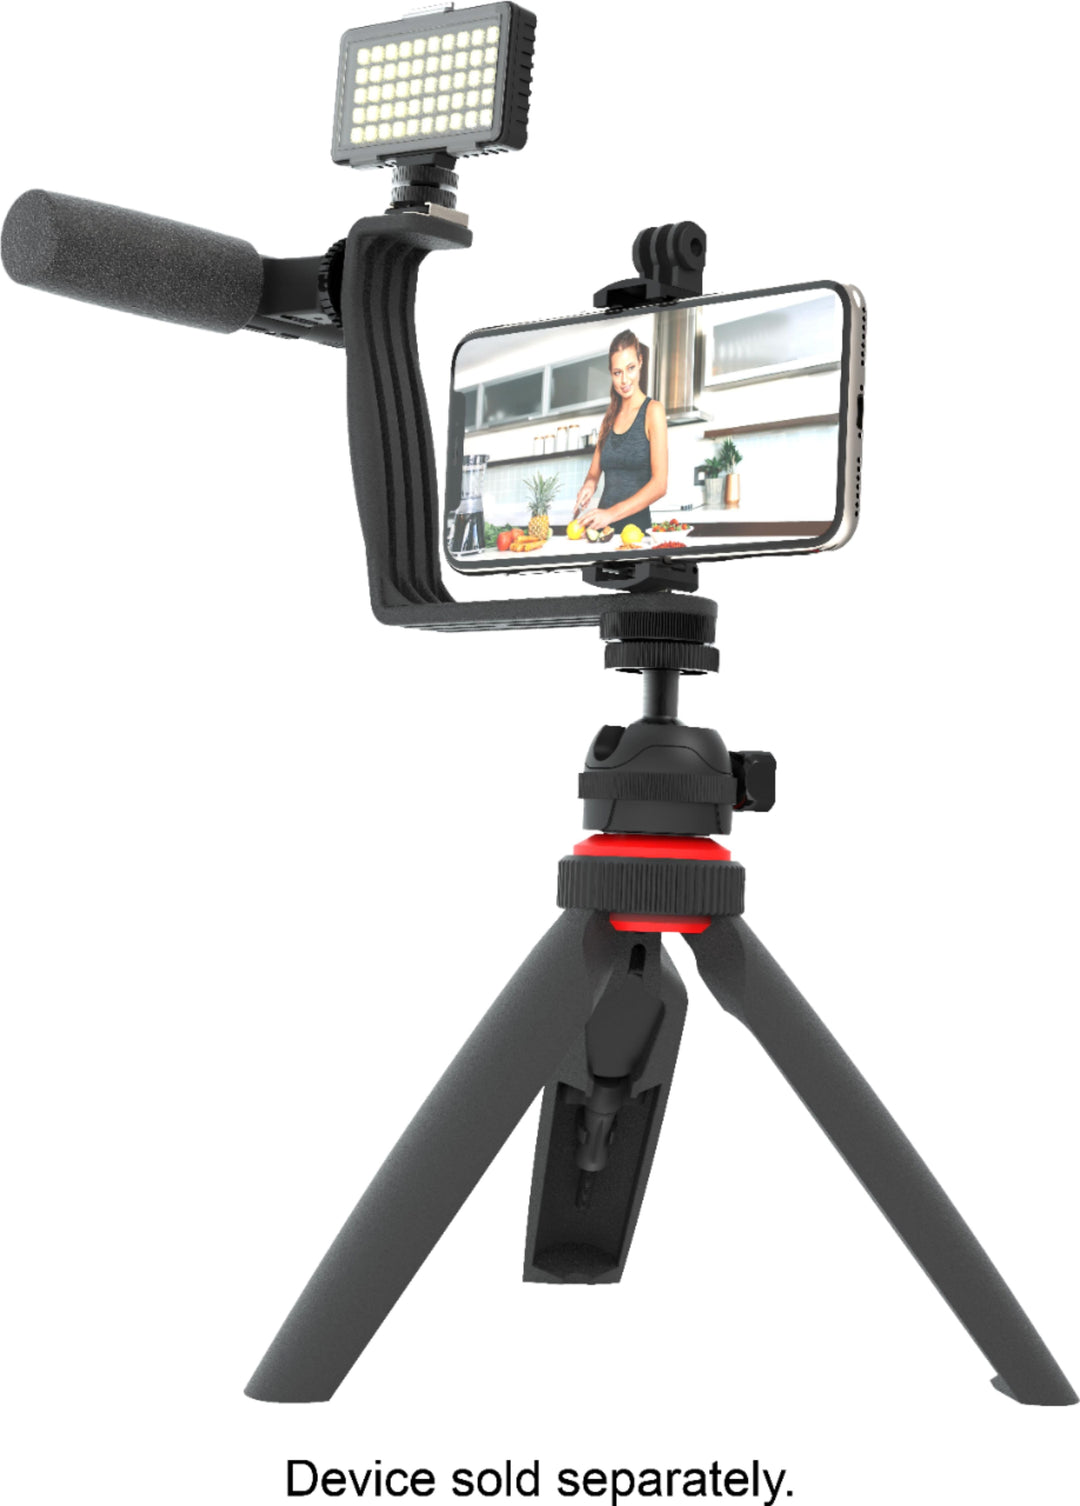 Digipower - Phone Video Stabilizer Rig Kit with Microphone, Light diffuser and Mini tripod for iPhone, Samsung and Digital Cameras - Black_0